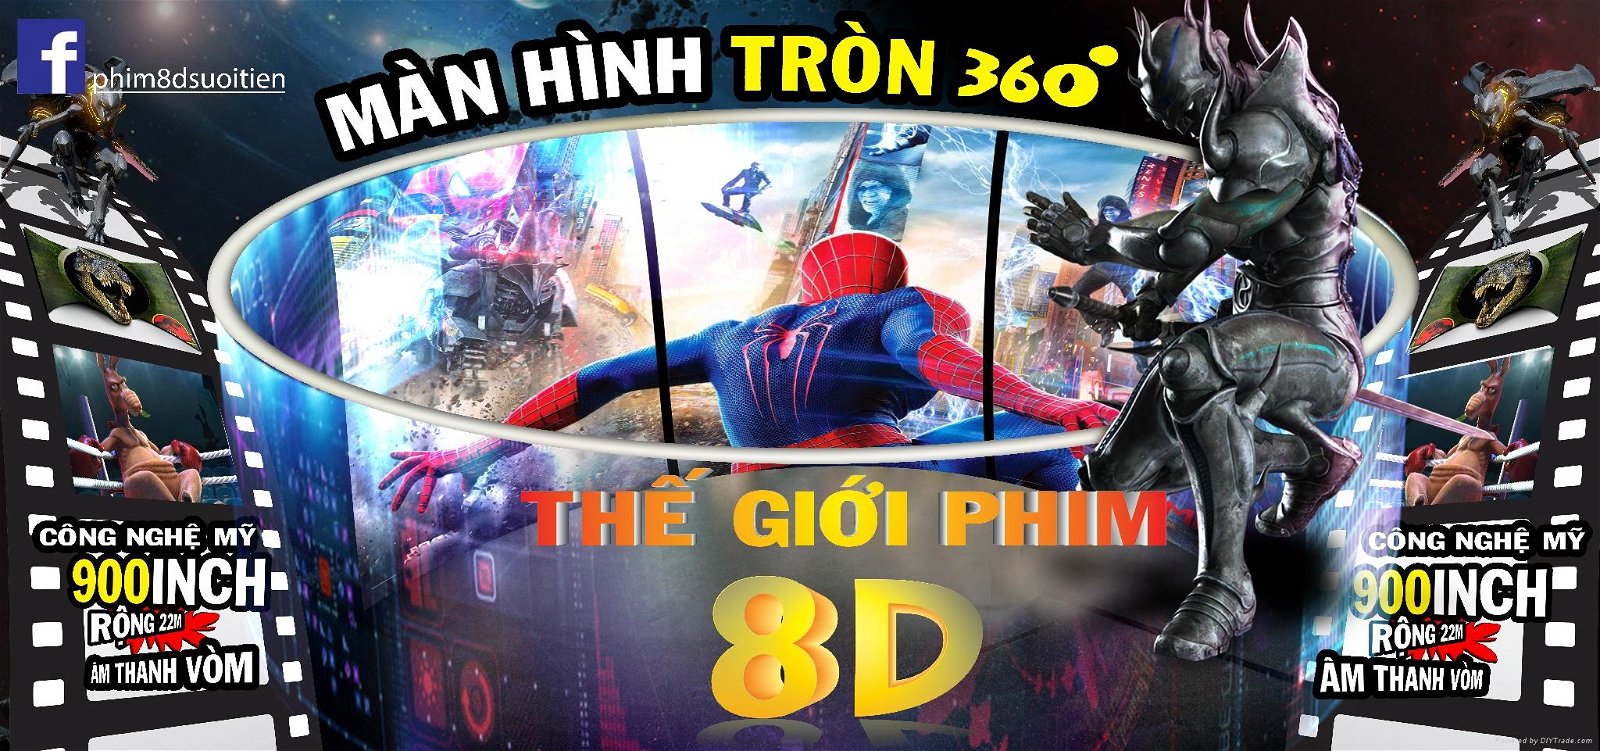 8D cinema with 3D images,360 degrees screen,full effects 5